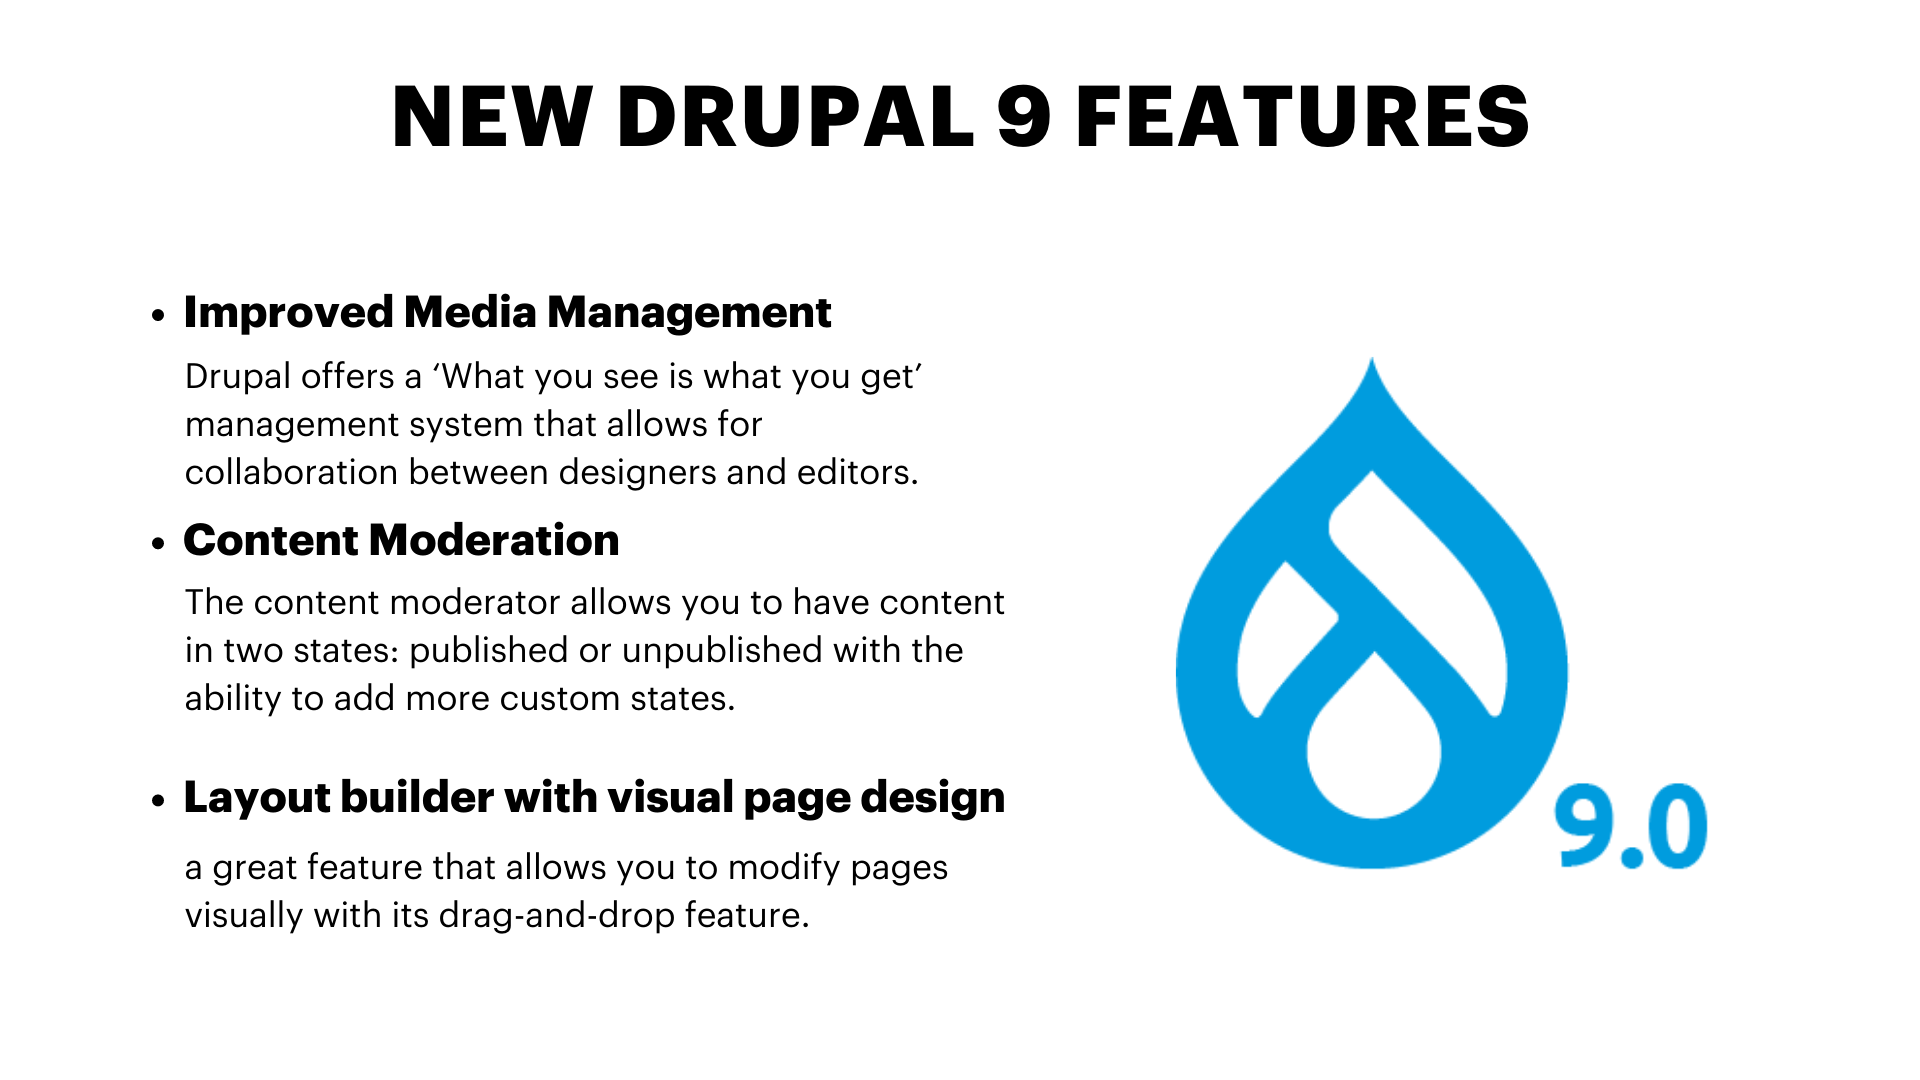 New Drupal 9 features